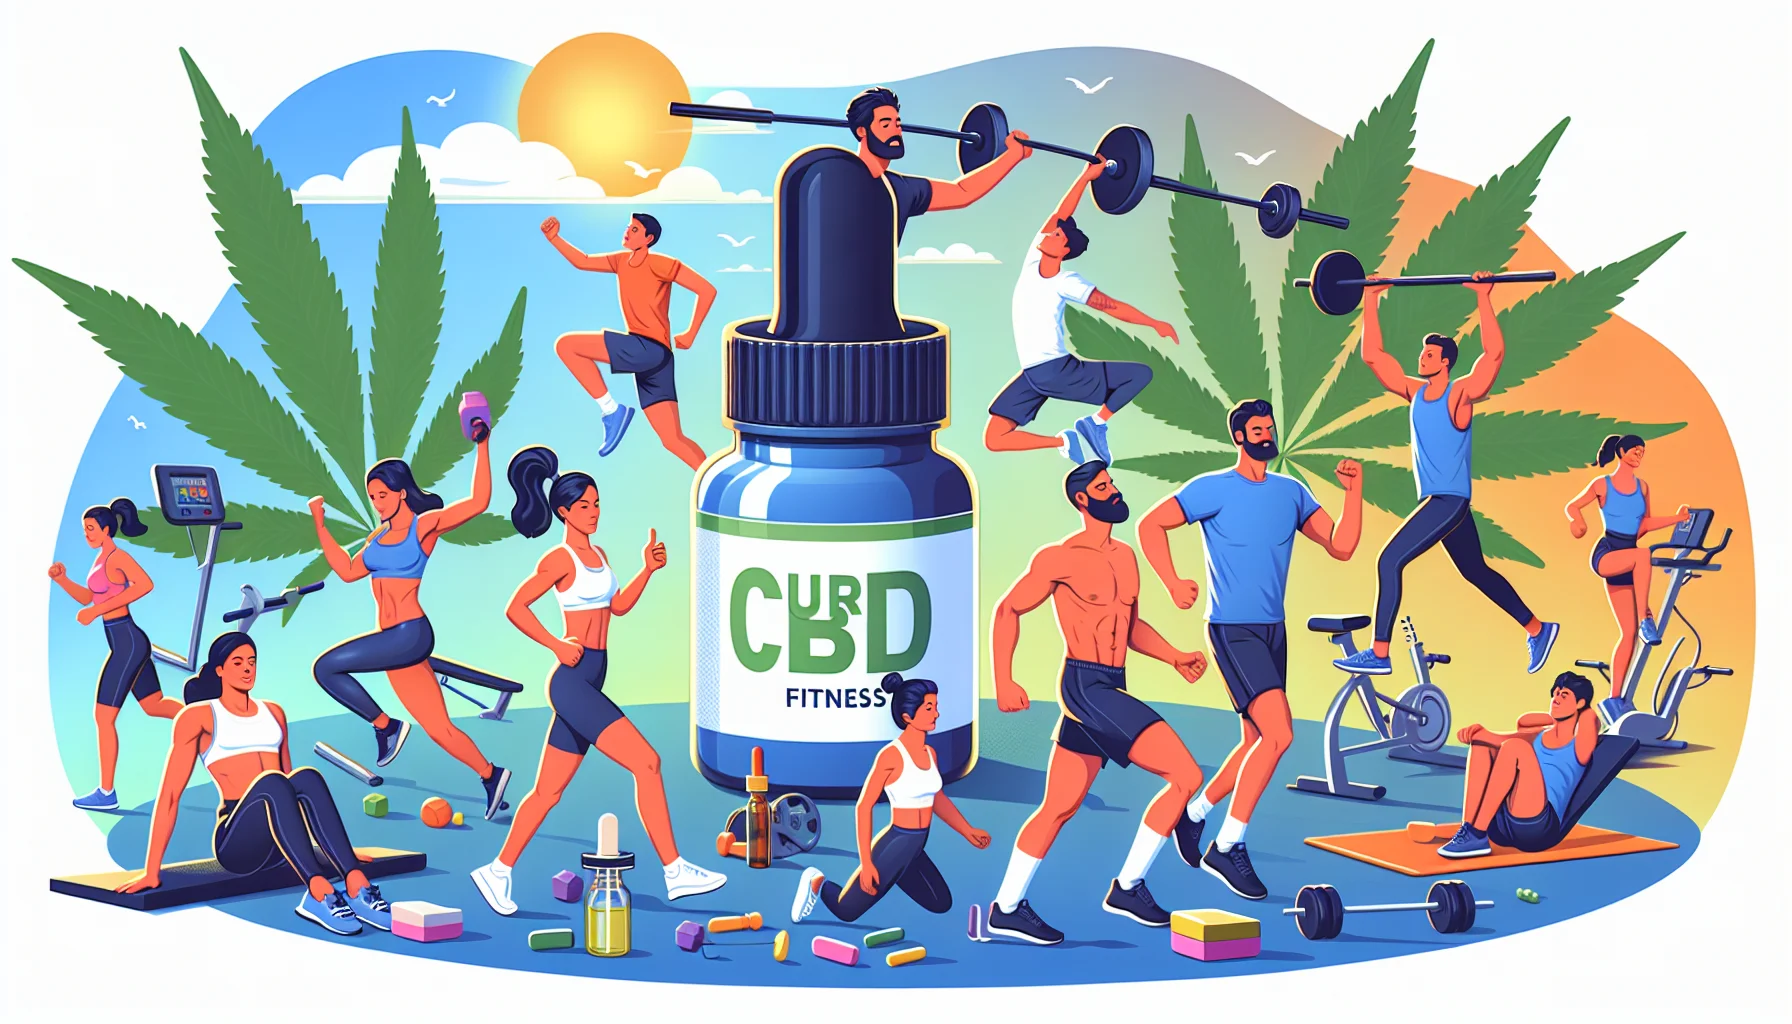 Generate an amusing and realistic scene showing the fitness benefits of pure CBD. The scene should depict people in various exercise activities such as yoga, weightlifting, and running. There might be a sense of relaxation and focus emanating from those exercising. Please include elements such as a CBD oil bottle or CBD-infused energy bars. Let's have a balance of men and women from diverse descents like Hispanic, Caucasian, Black, Middle-Eastern, and South-Asian all thoroughly enjoying their workouts.